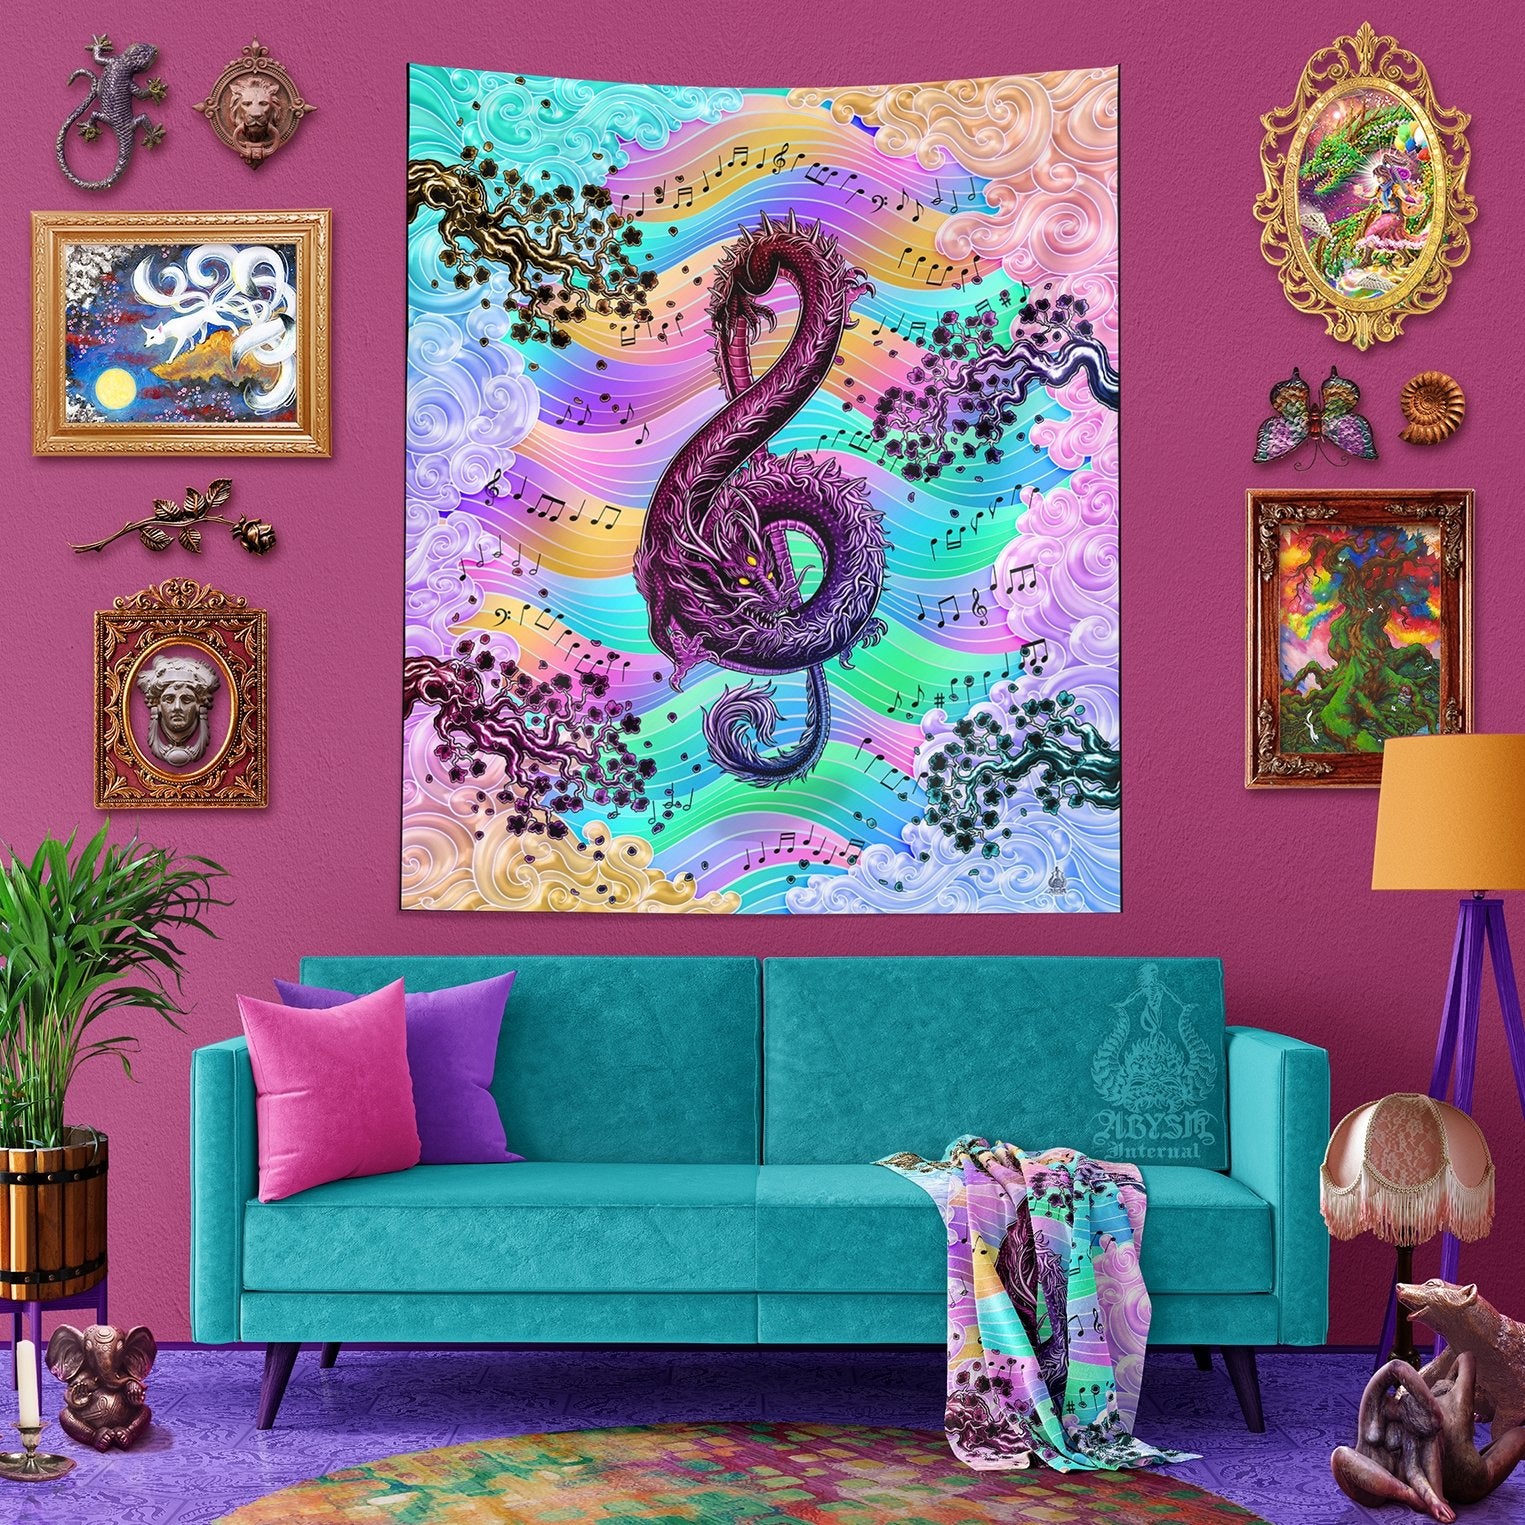 Holographic Tapestry, Music Wall Hanging, Aesthetic Home Decor, Art Print, Eclectic and Funky - Pastel Punk Dragon, Yume Kawaii and Fairy Kei, Treble Clef - Abysm Internal